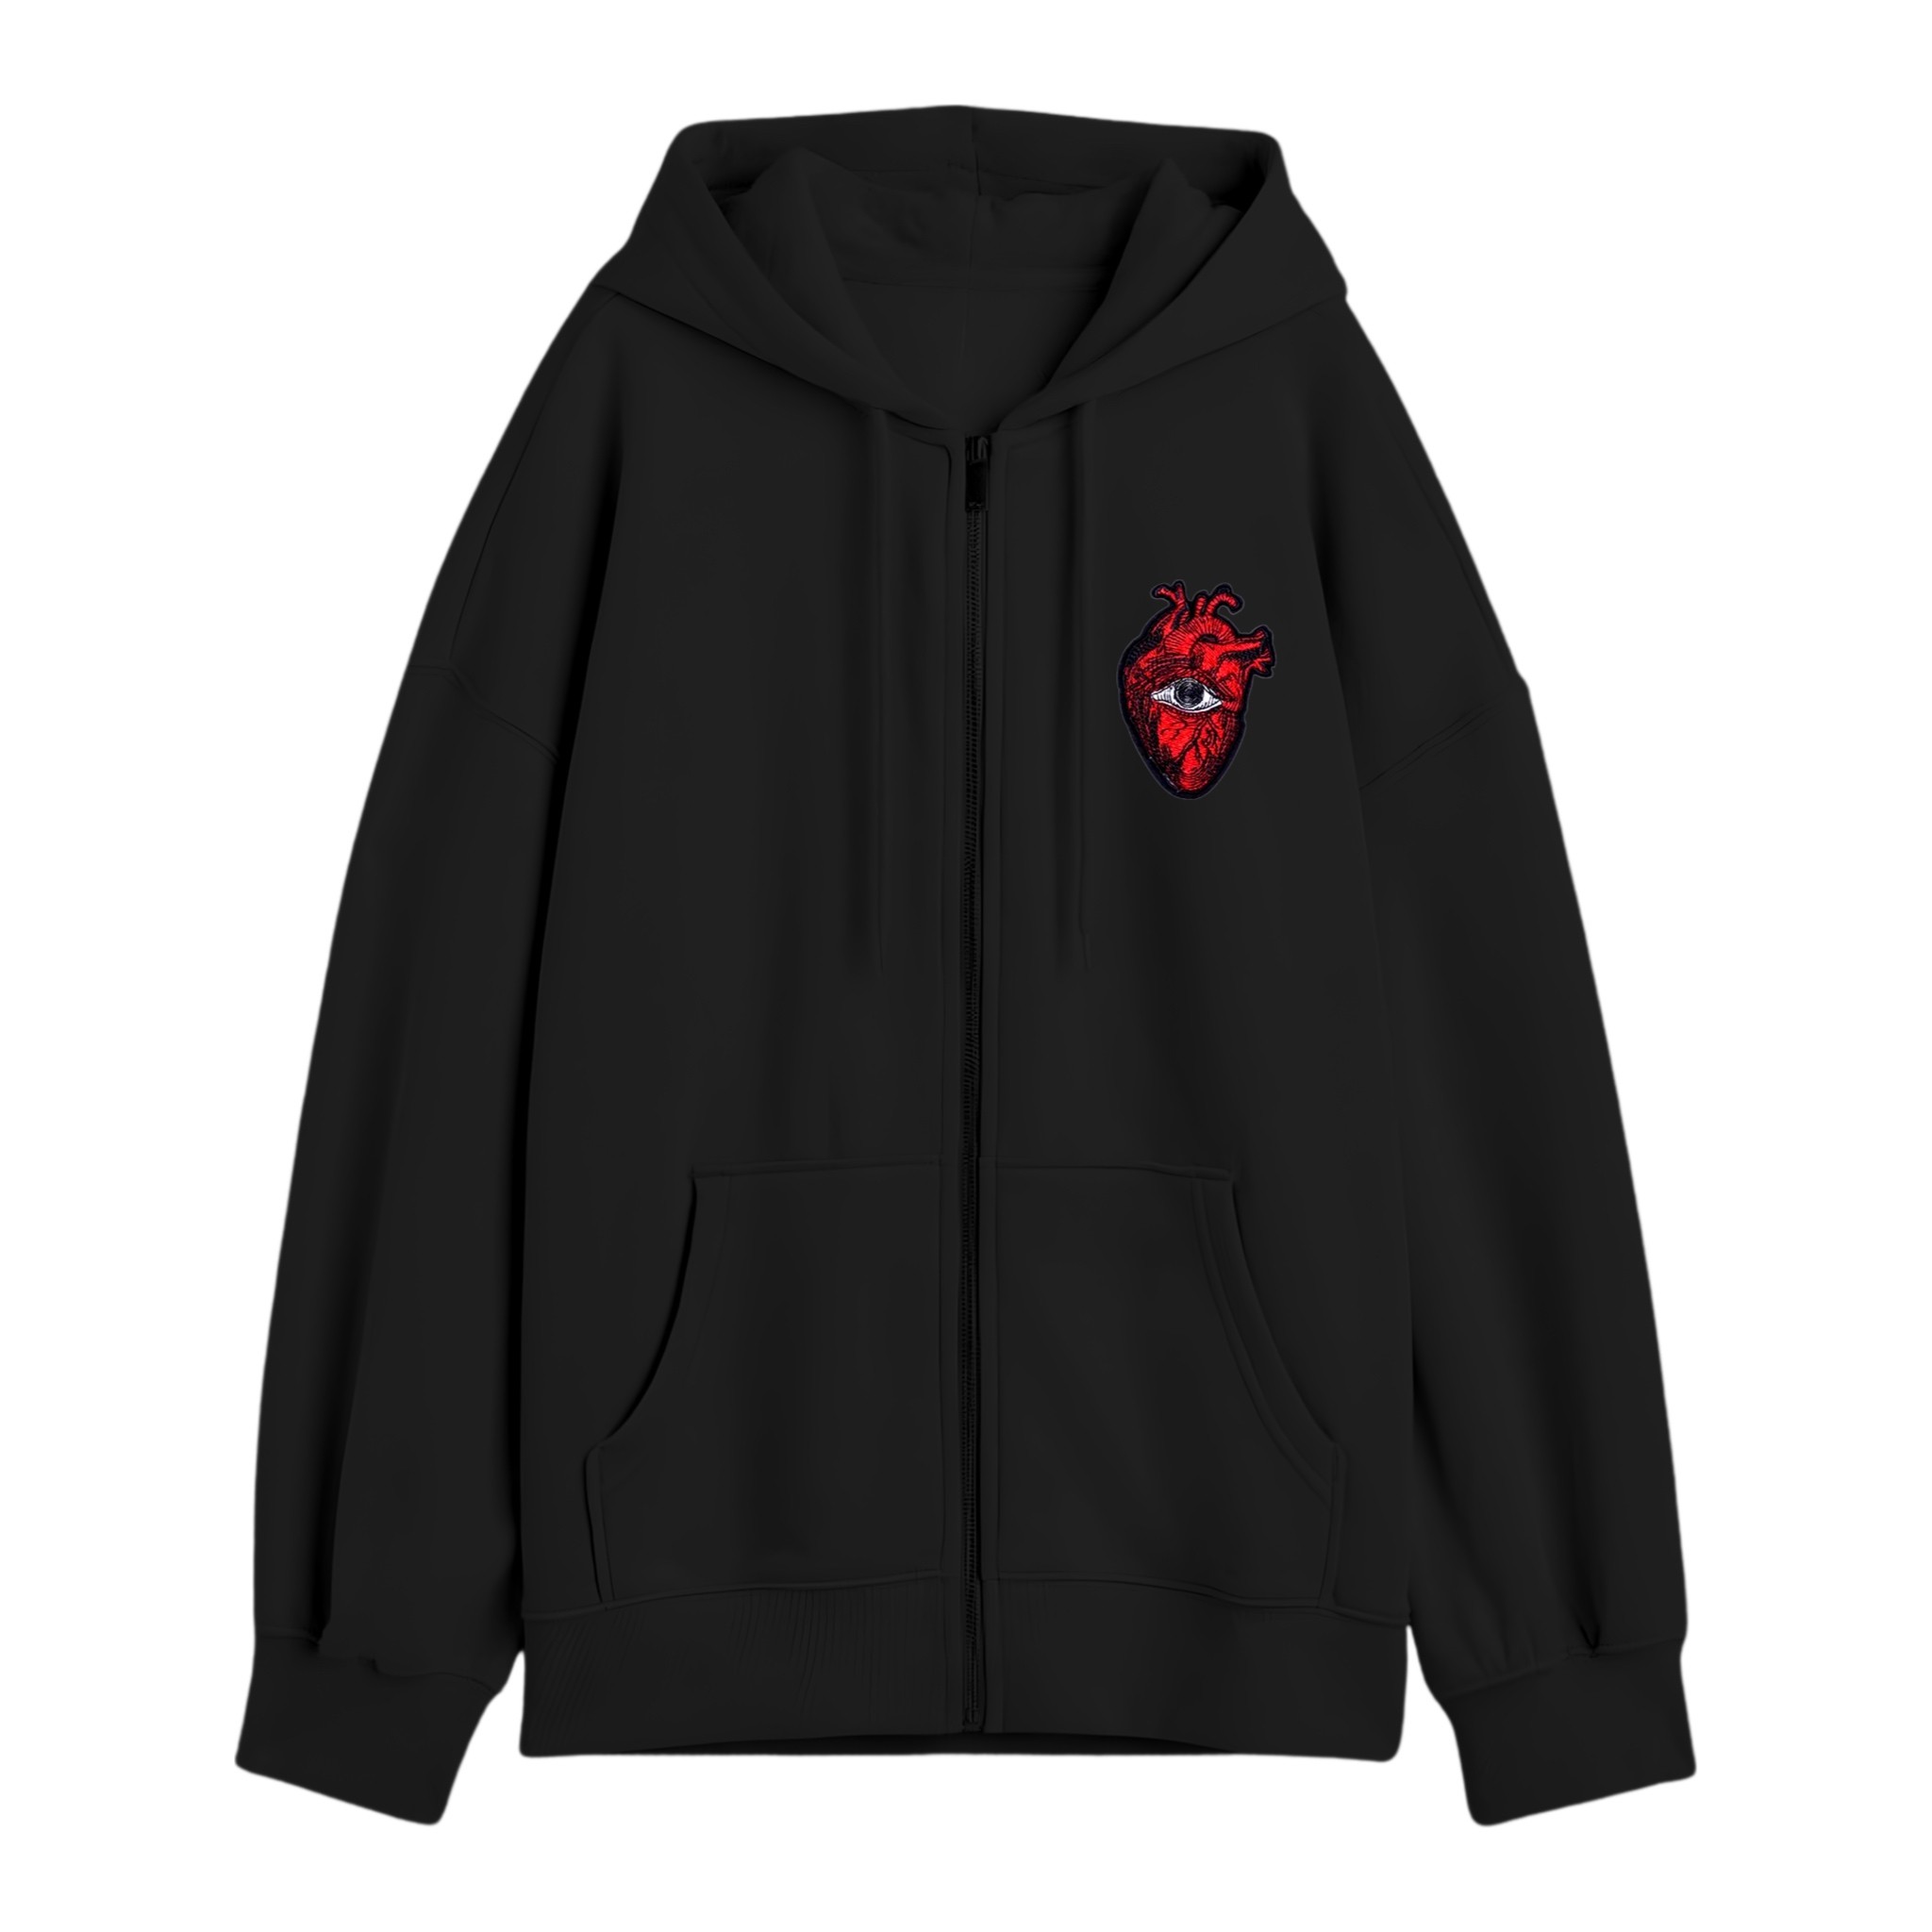 THIRD EYE patched zipped regular fit hoodie